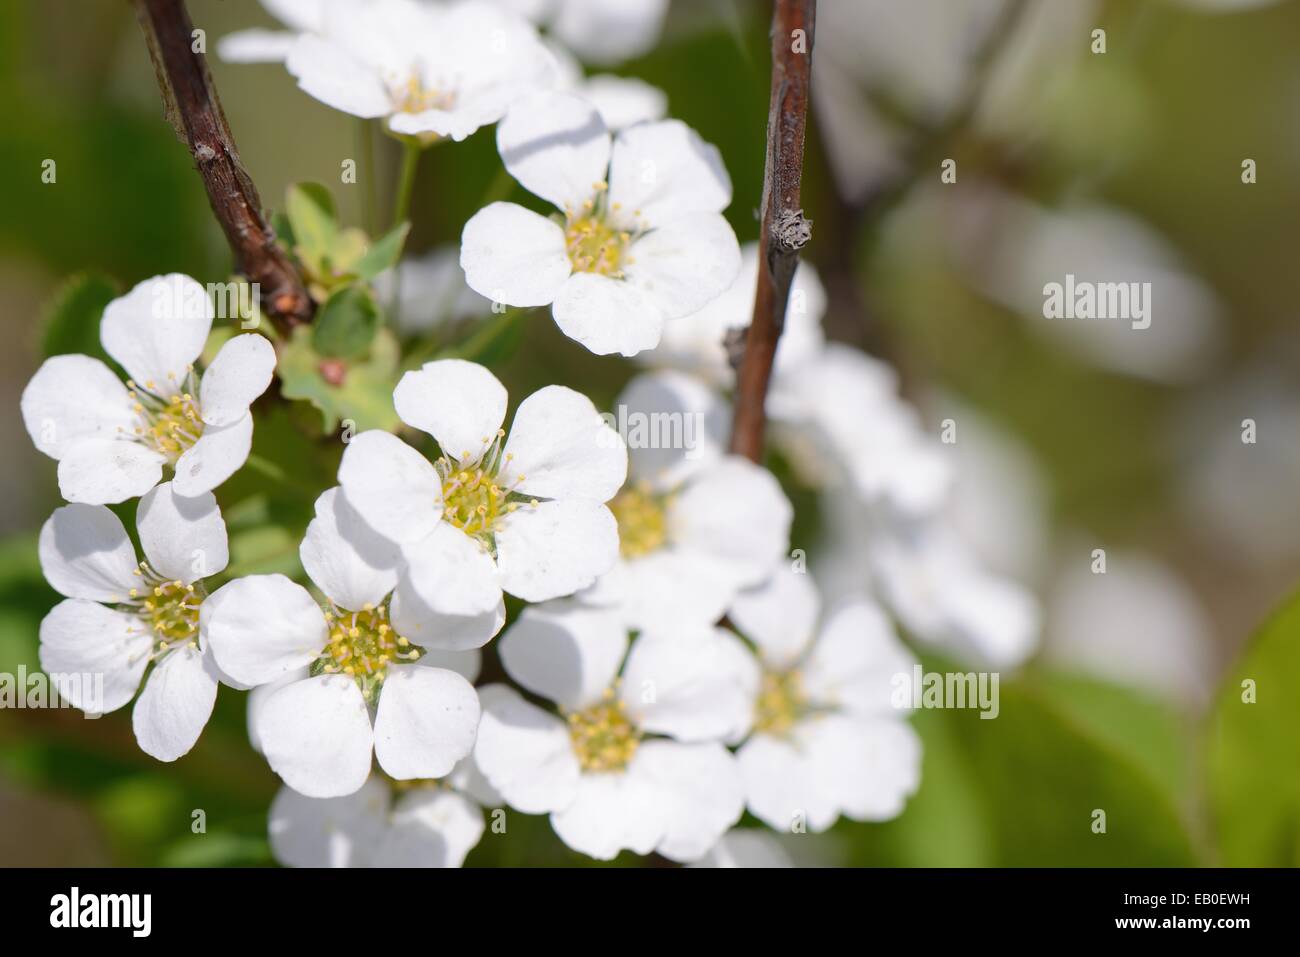 Closeup of white colored bridal wreath flowers Stock Photo